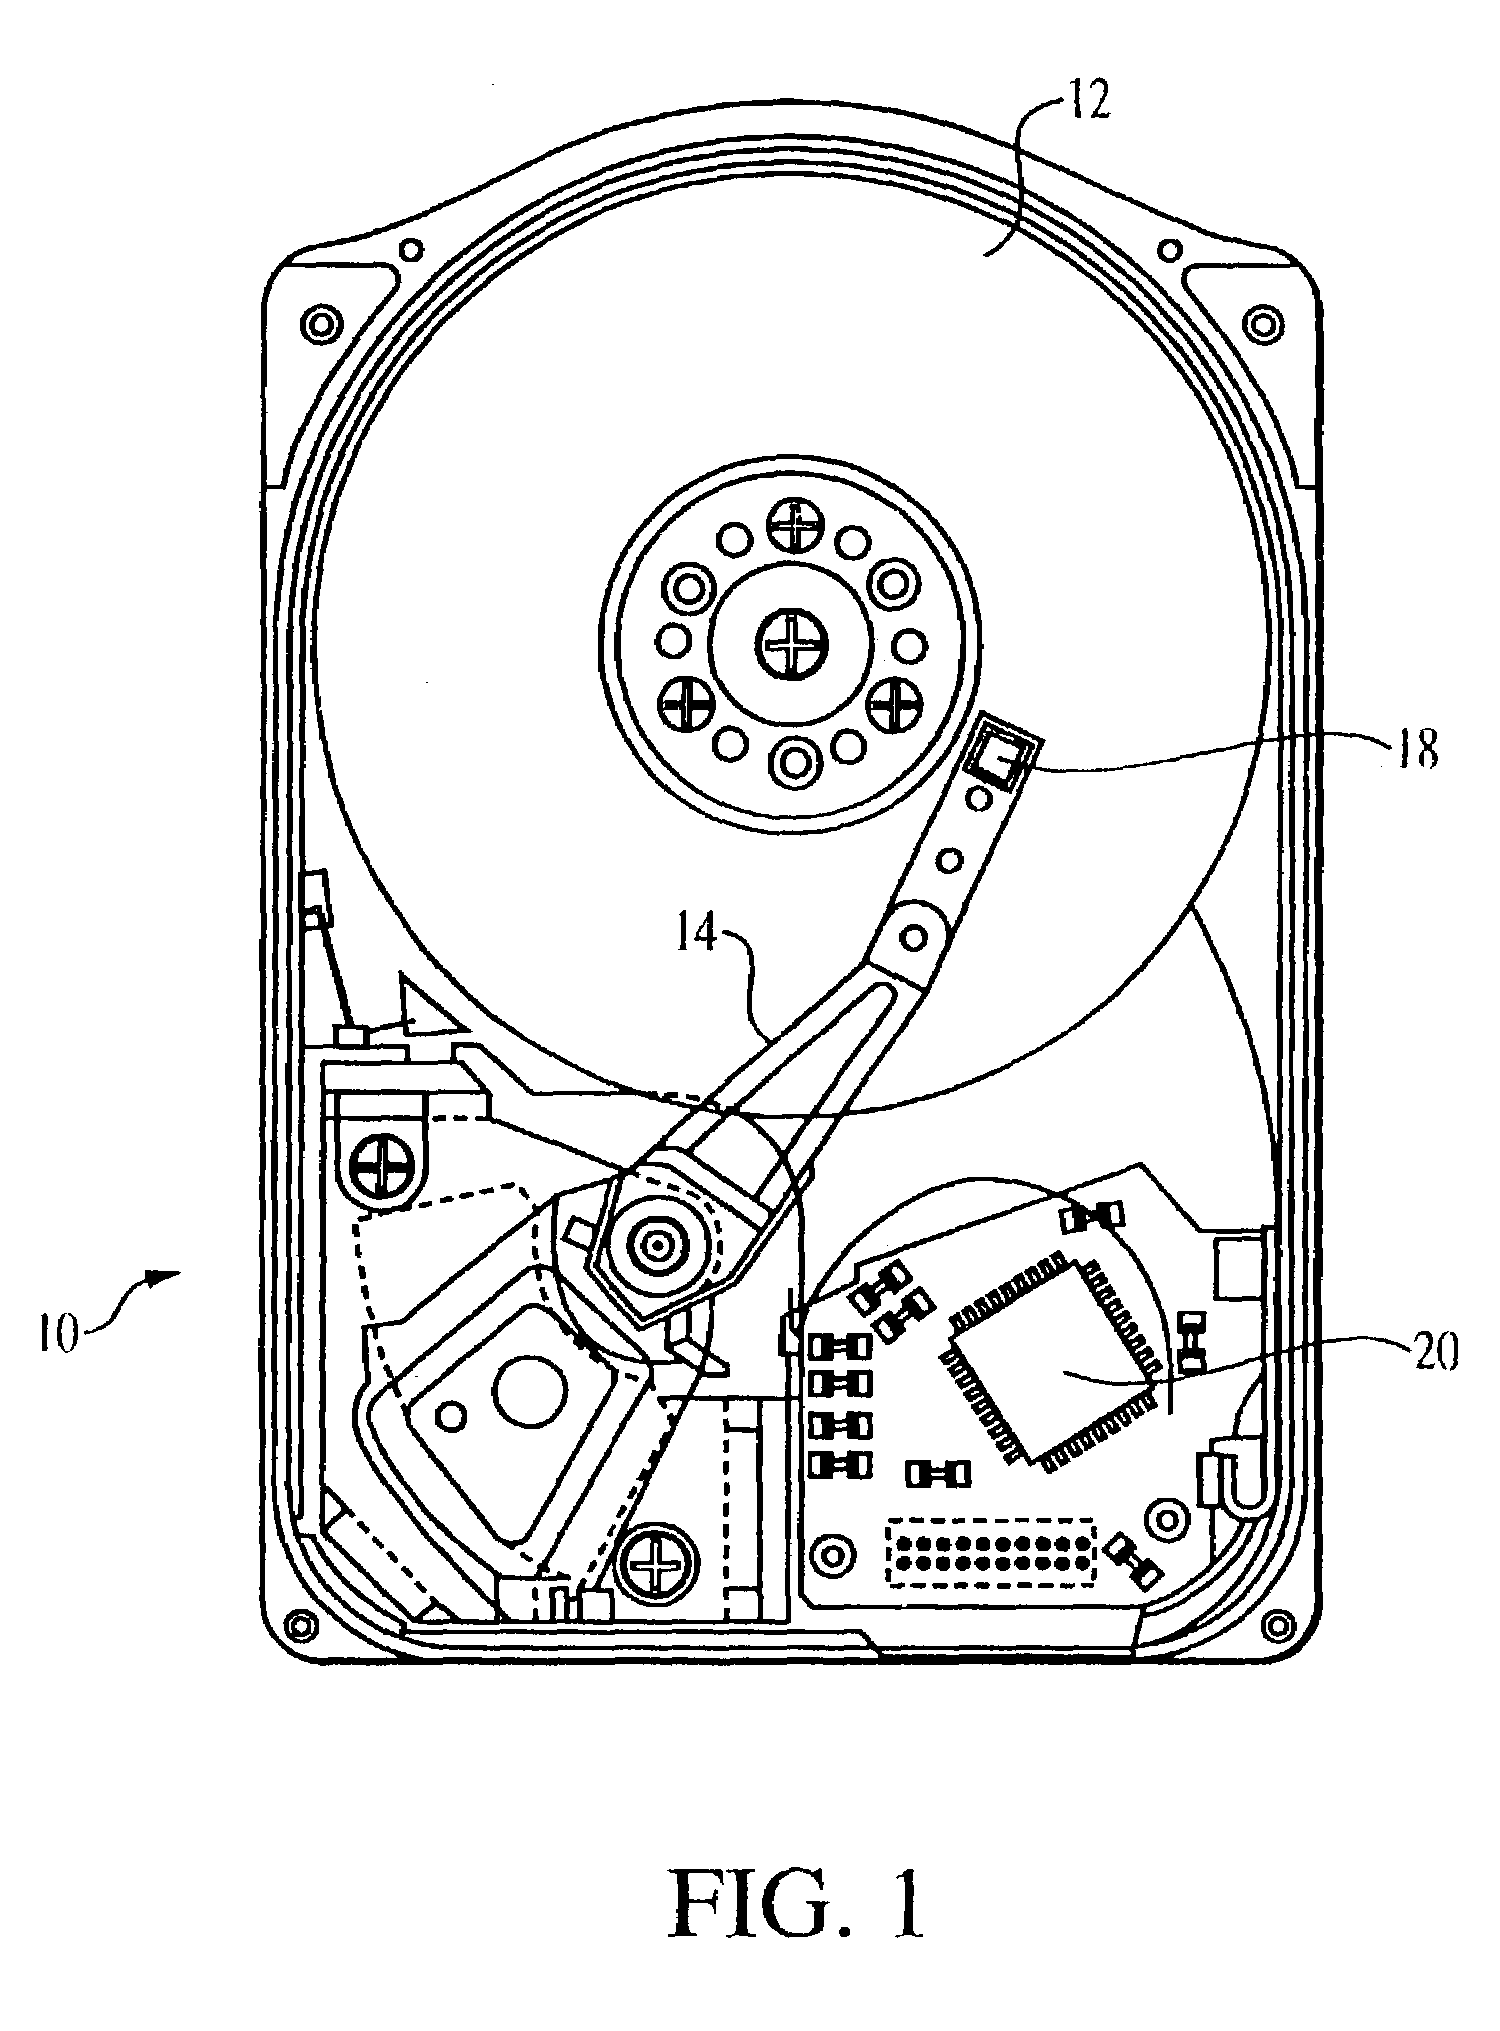 Methods and apparatus for correcting data and error detection codes on the fly